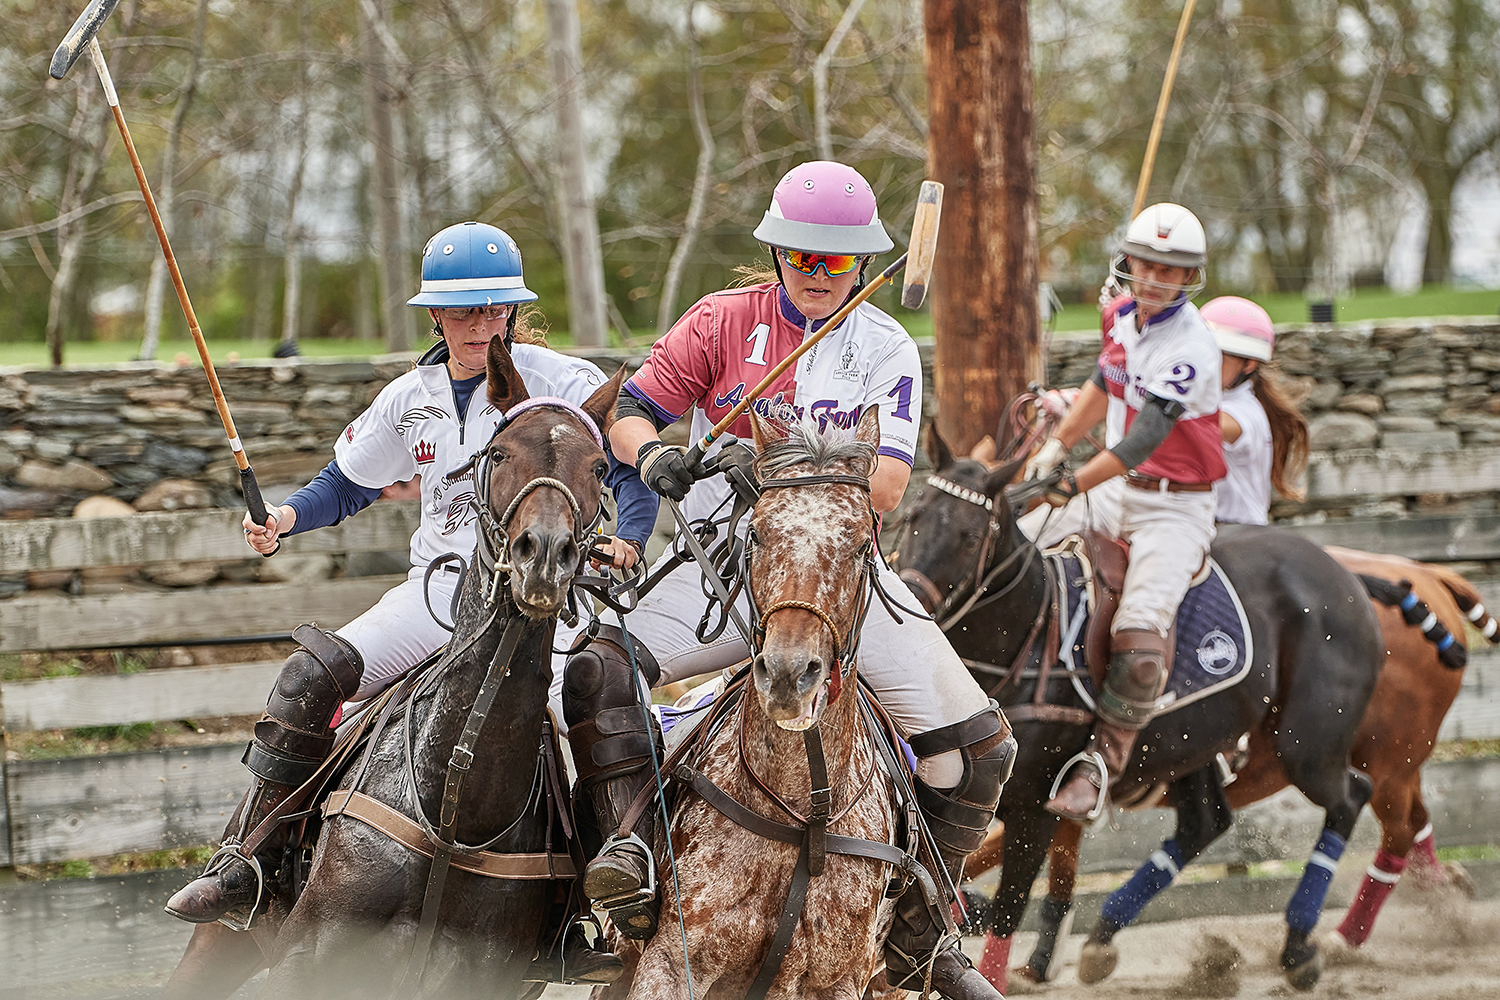 Hands-on Review: Shooting Arena Polo with the SIGMA 70-200mm F2.8